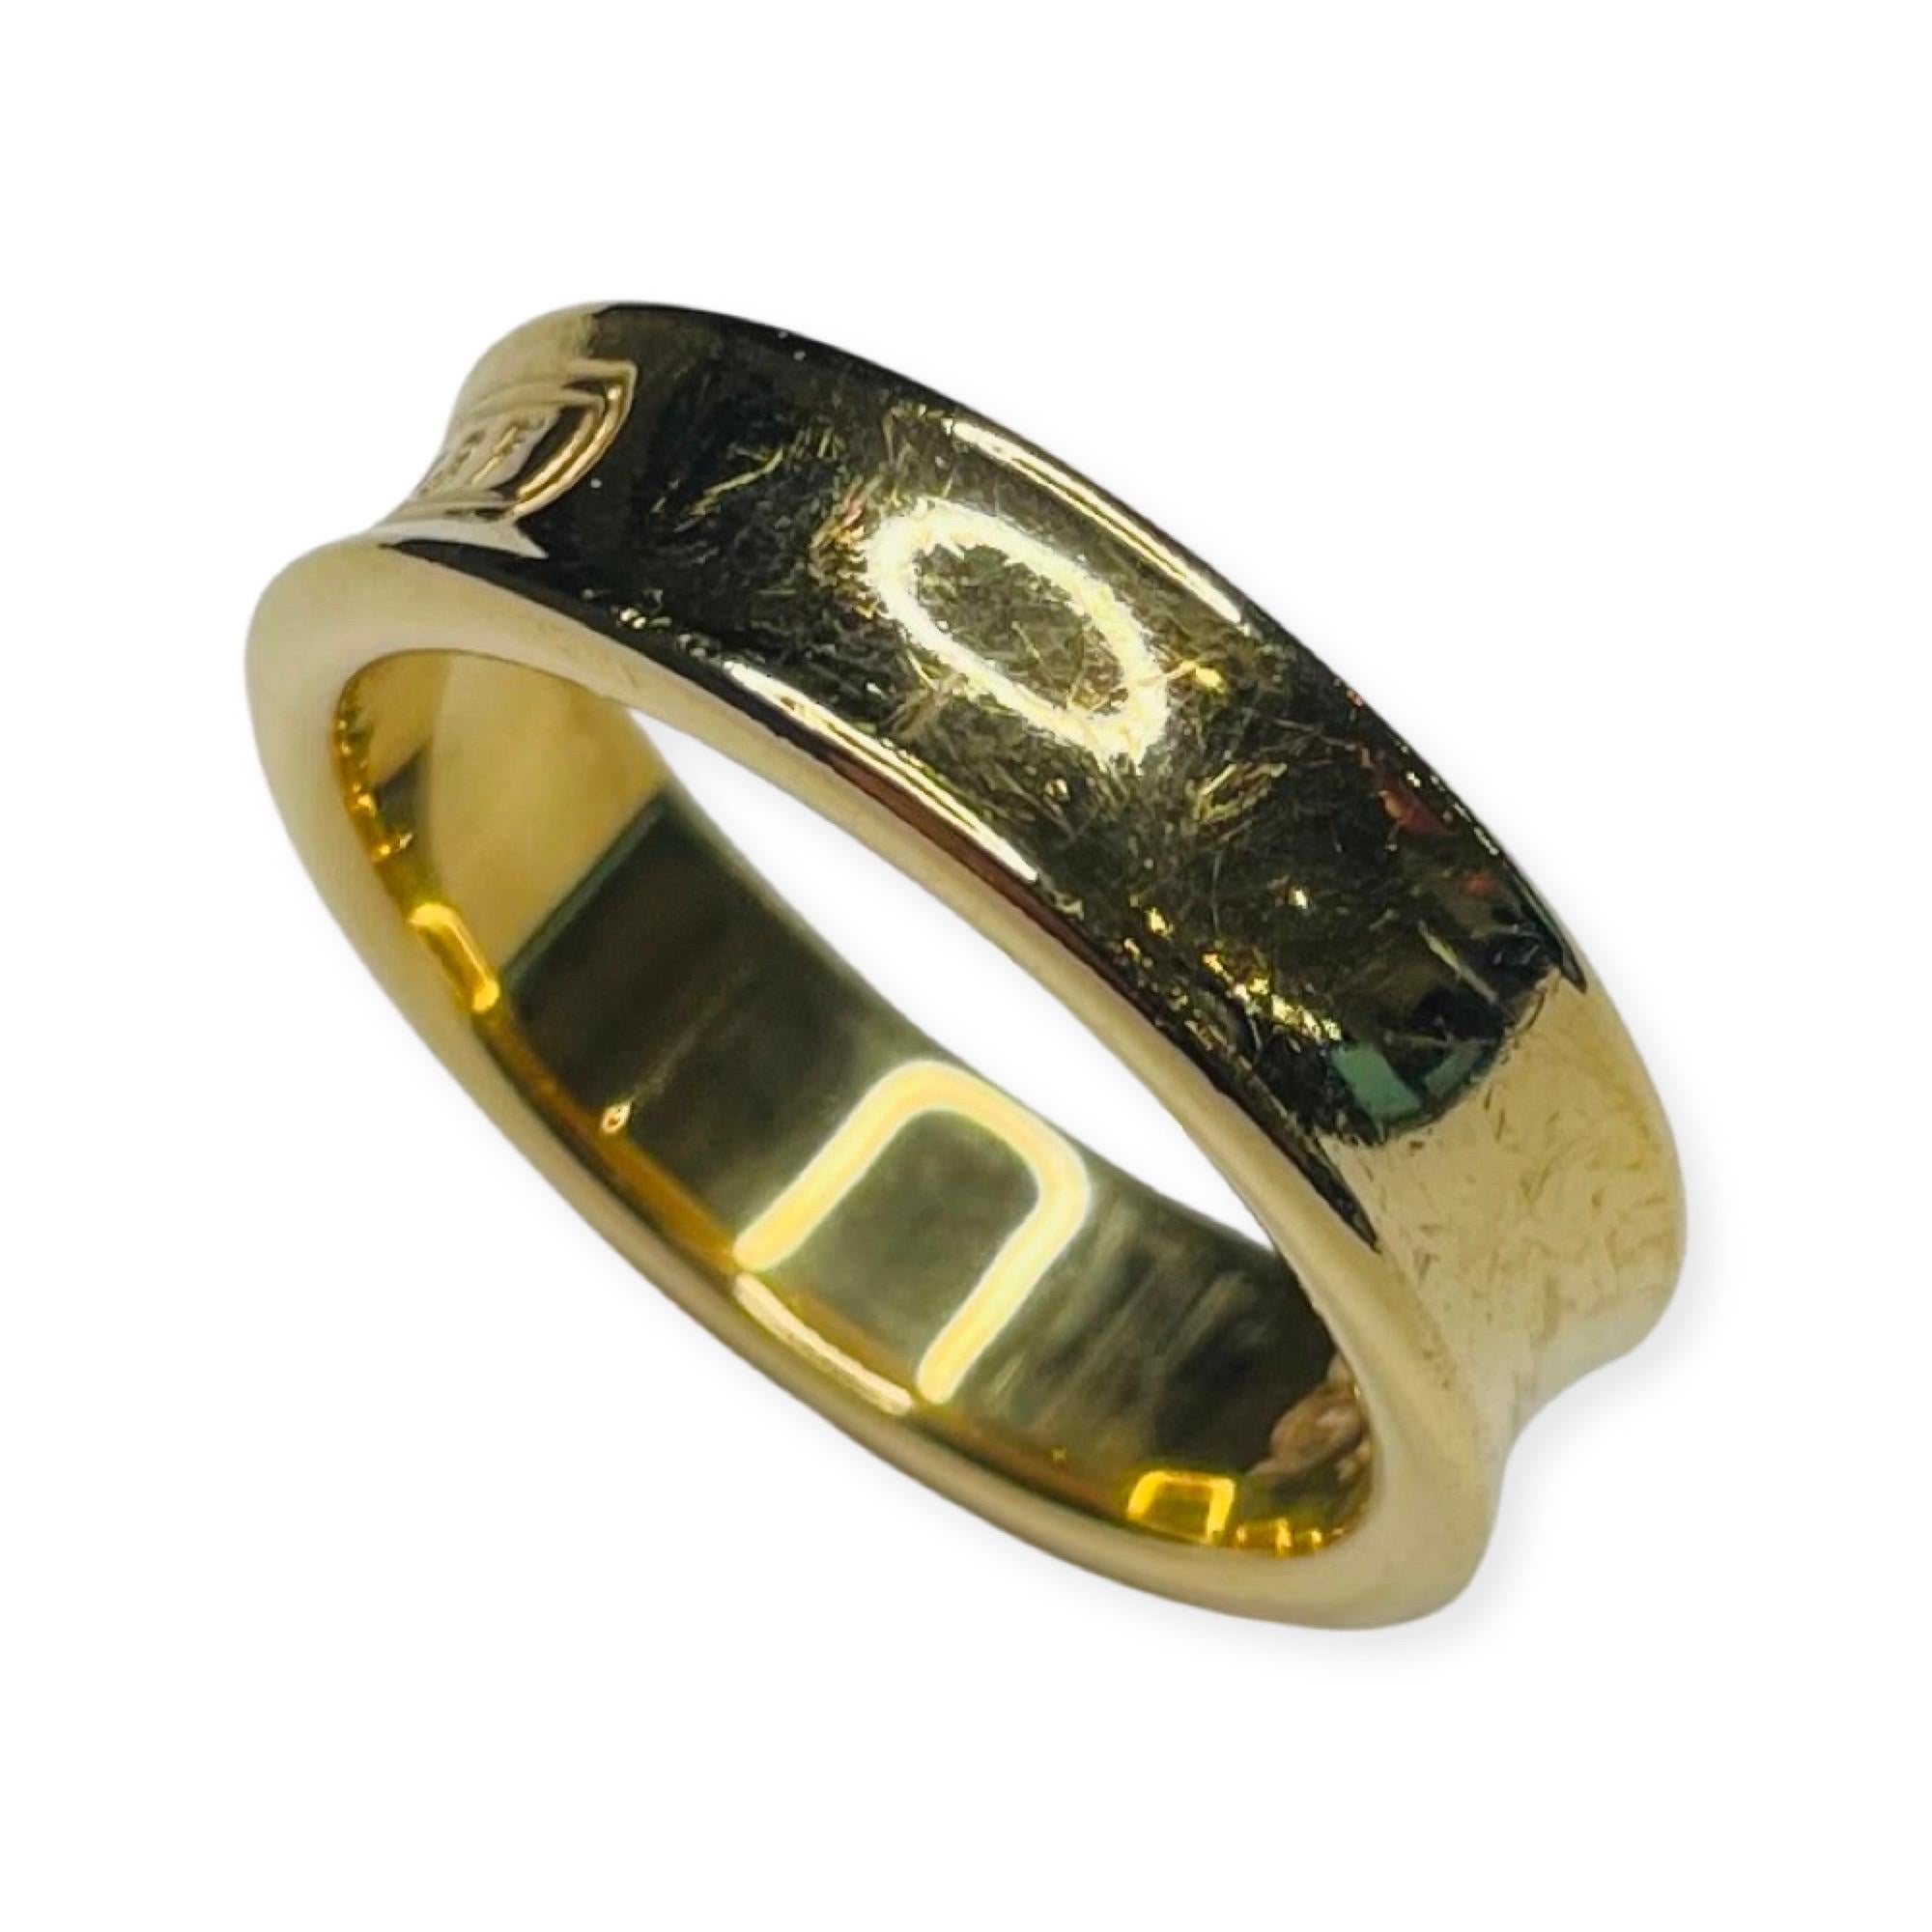 Tiffany 18K Yellow Gold Wedding Band 1897.  This ring is 6.0 mm in width. It is in excellent condition. It comes with the original Tiffany box. It is finger size 8.